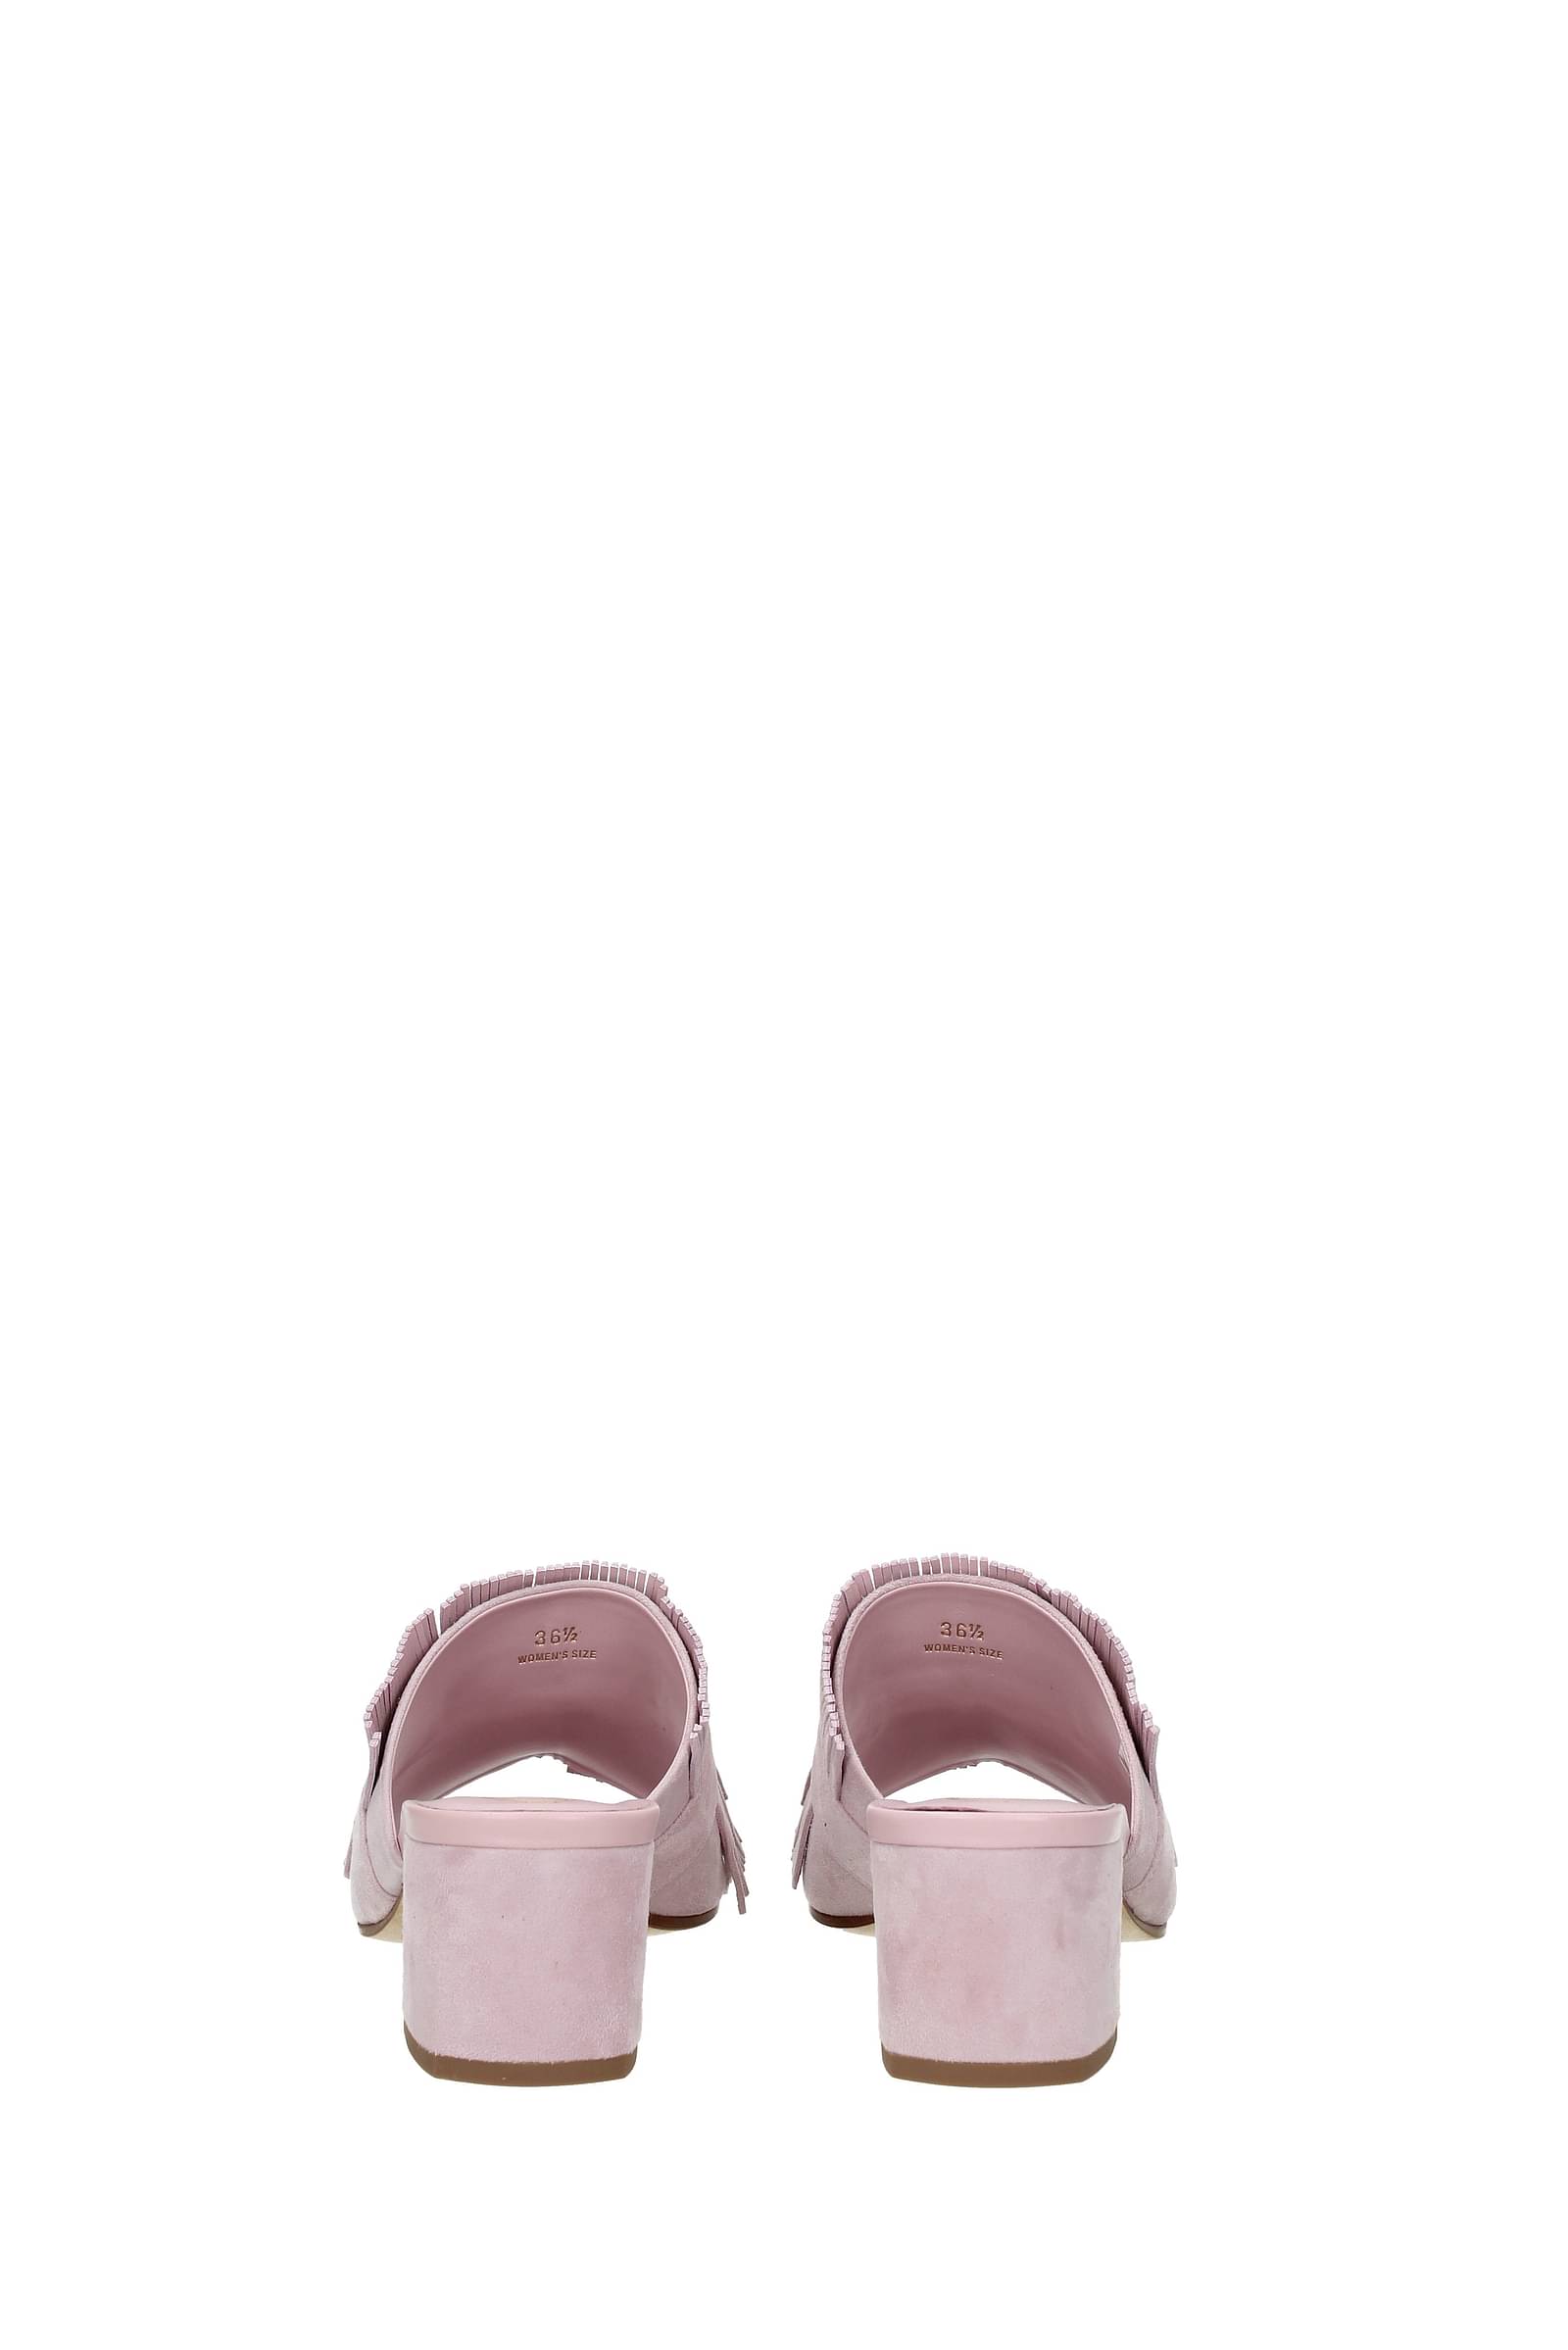 Tod's Sandals Women Suede Pink